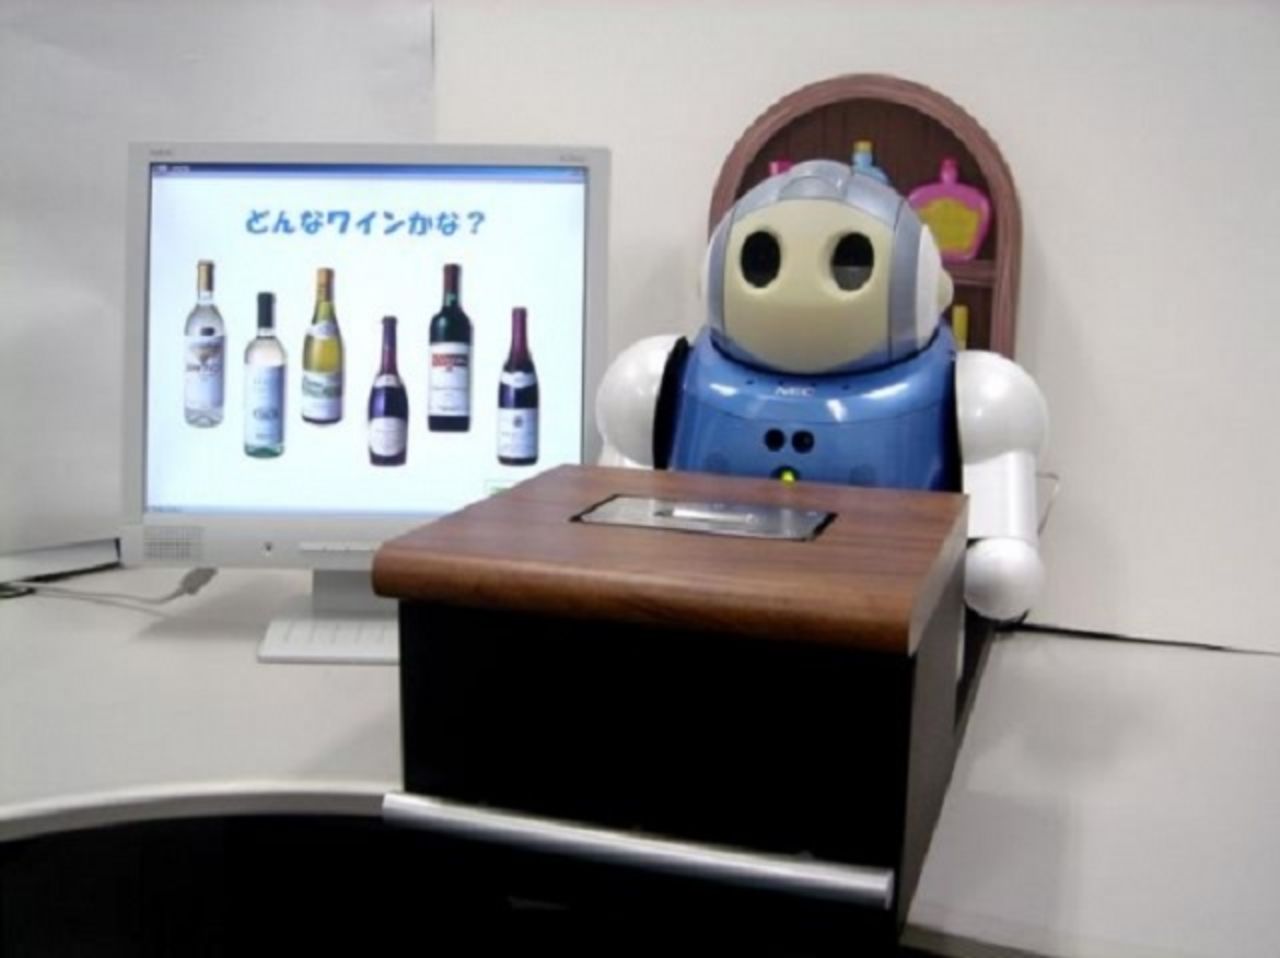 But humans aren't the only ones having fun: some robots have now got a taste for the booze themselves. Scientists in Japan have developed the wine-tasting "Robot sommelier", which has a sensor capable of distinguishing between varieties of wine. Très bien.